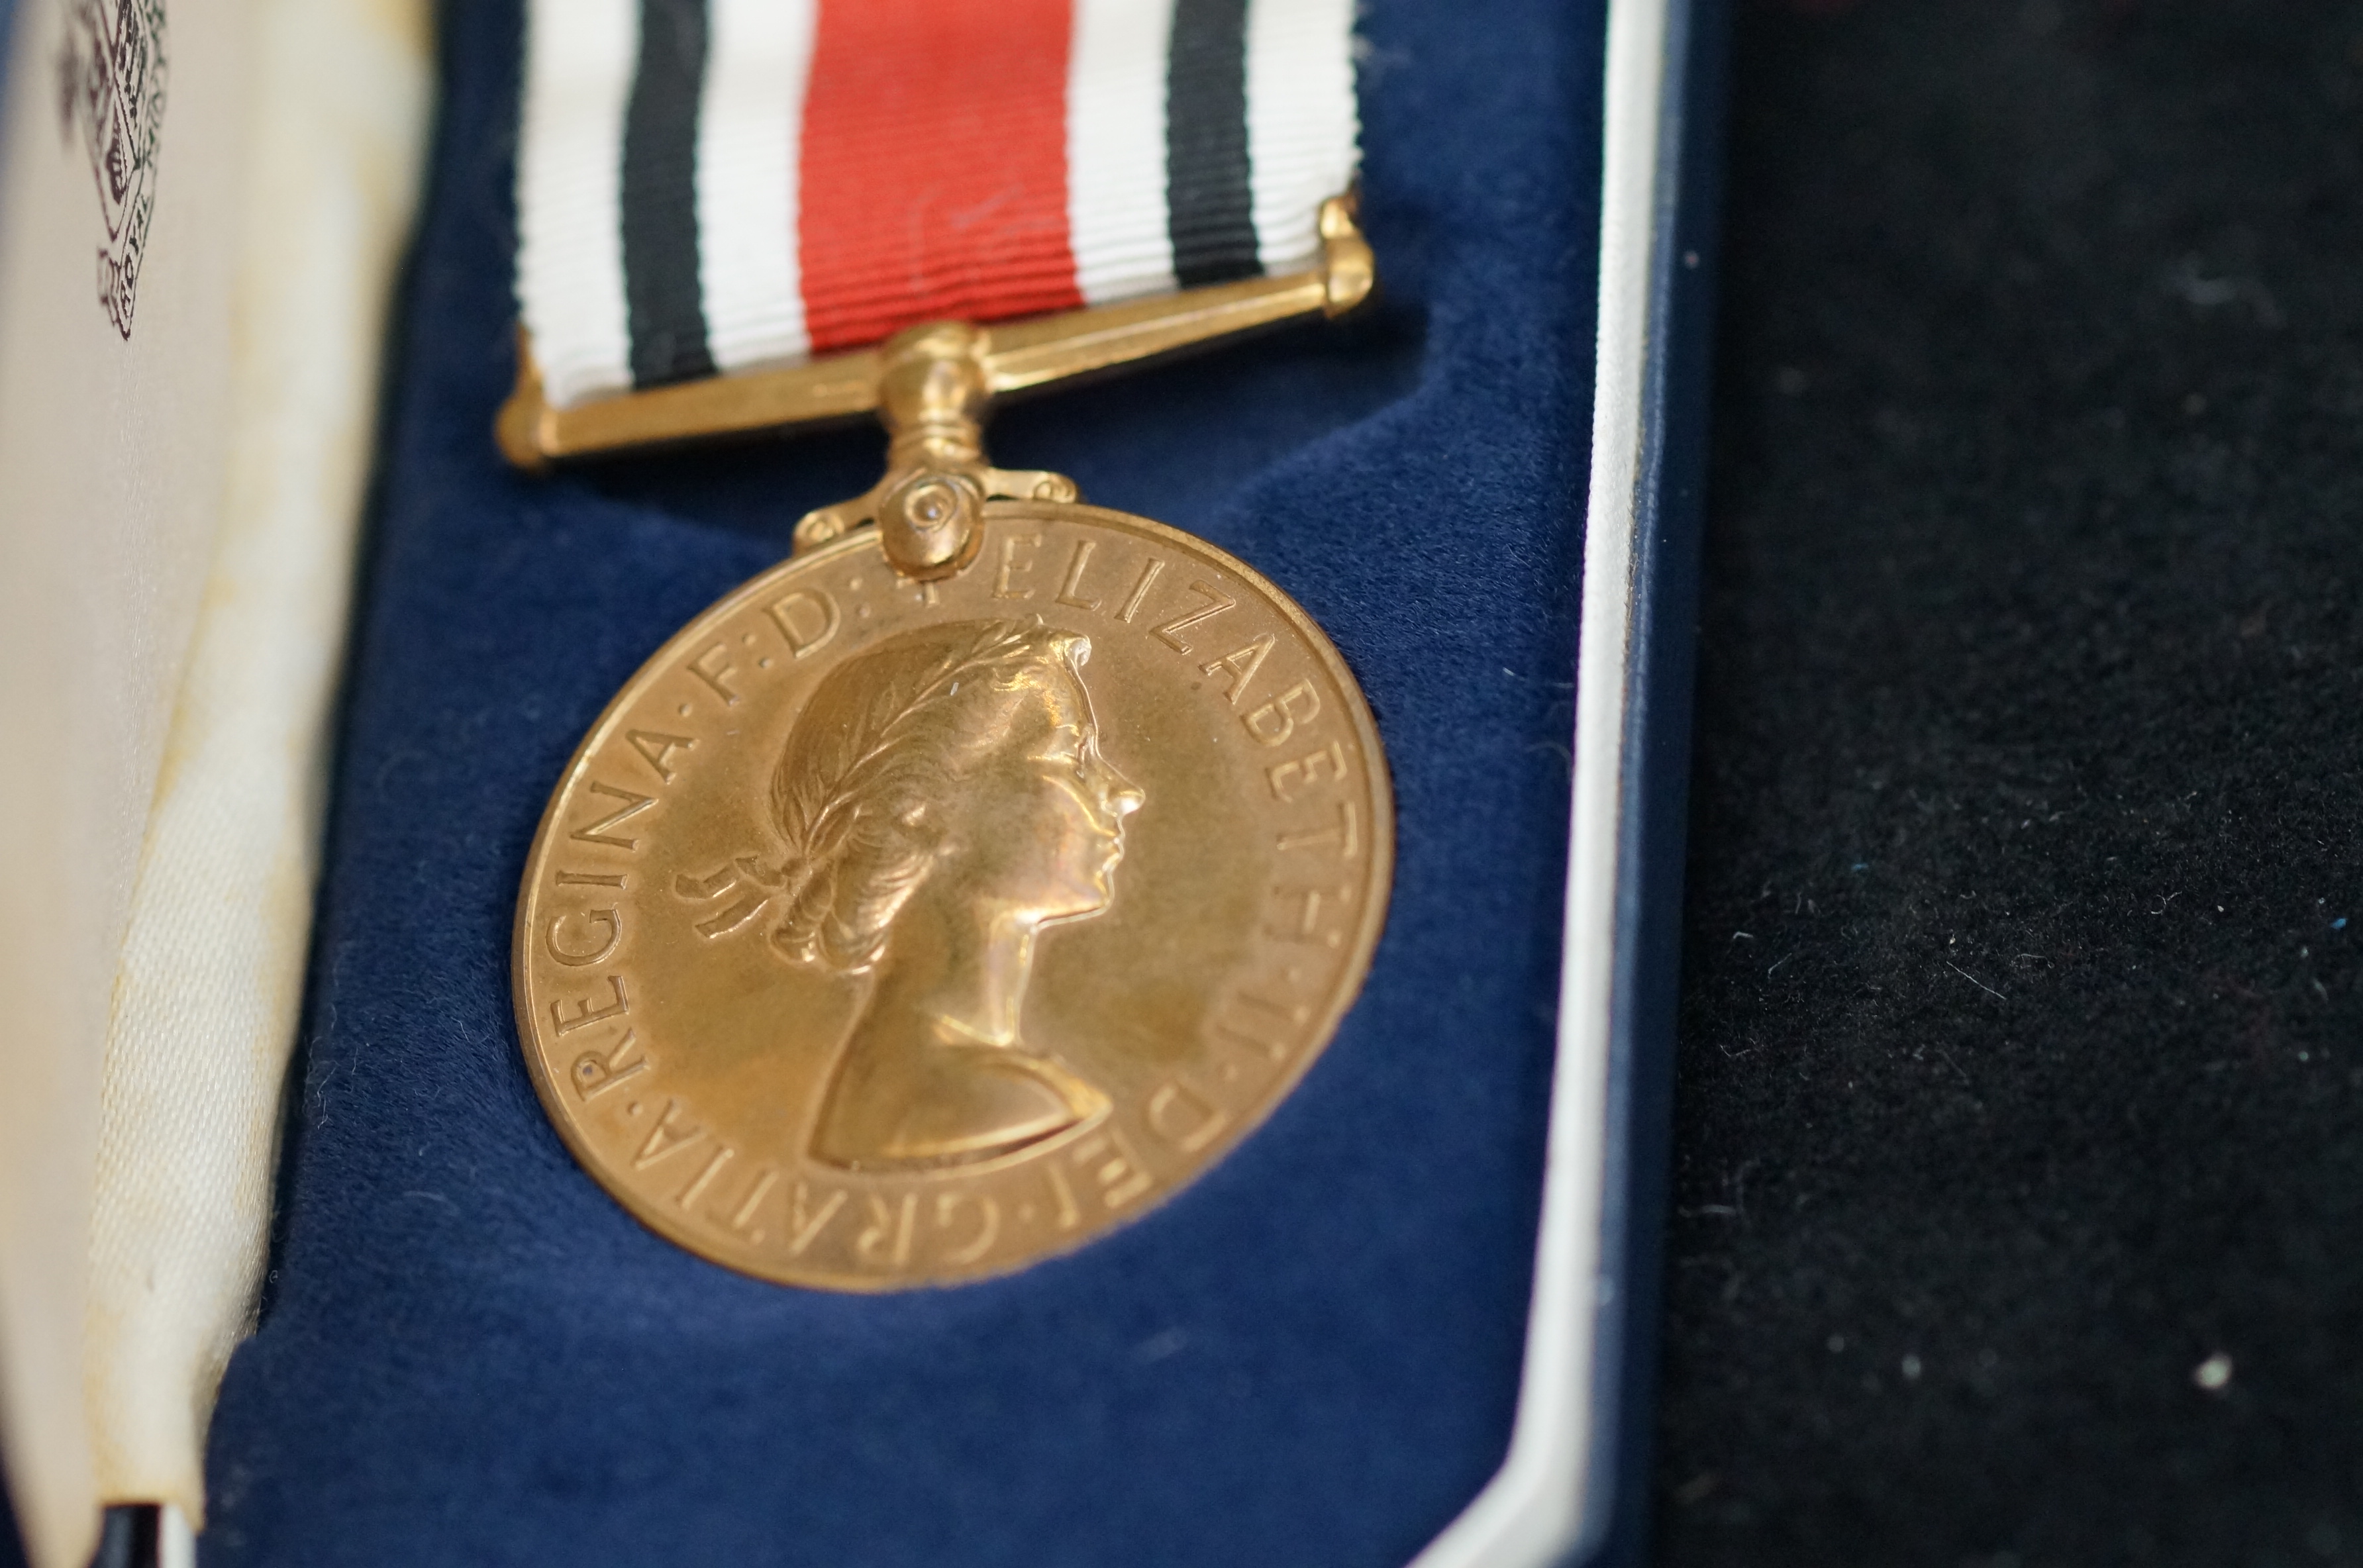 Police medal for the faithful service in the speci